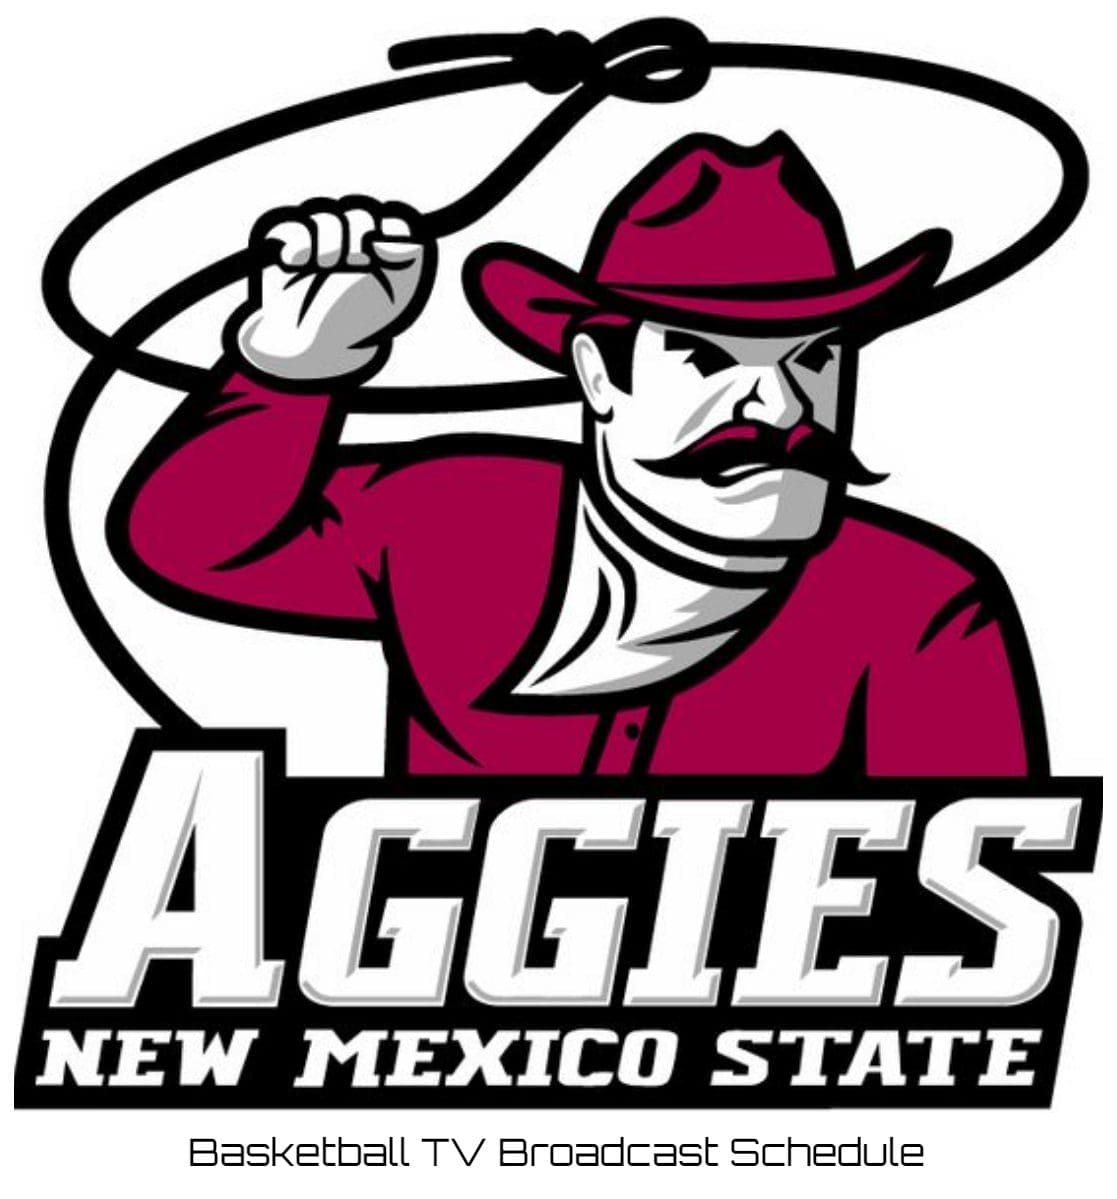 New Mexico State Aggies Basketball TV Broadcast Schedule